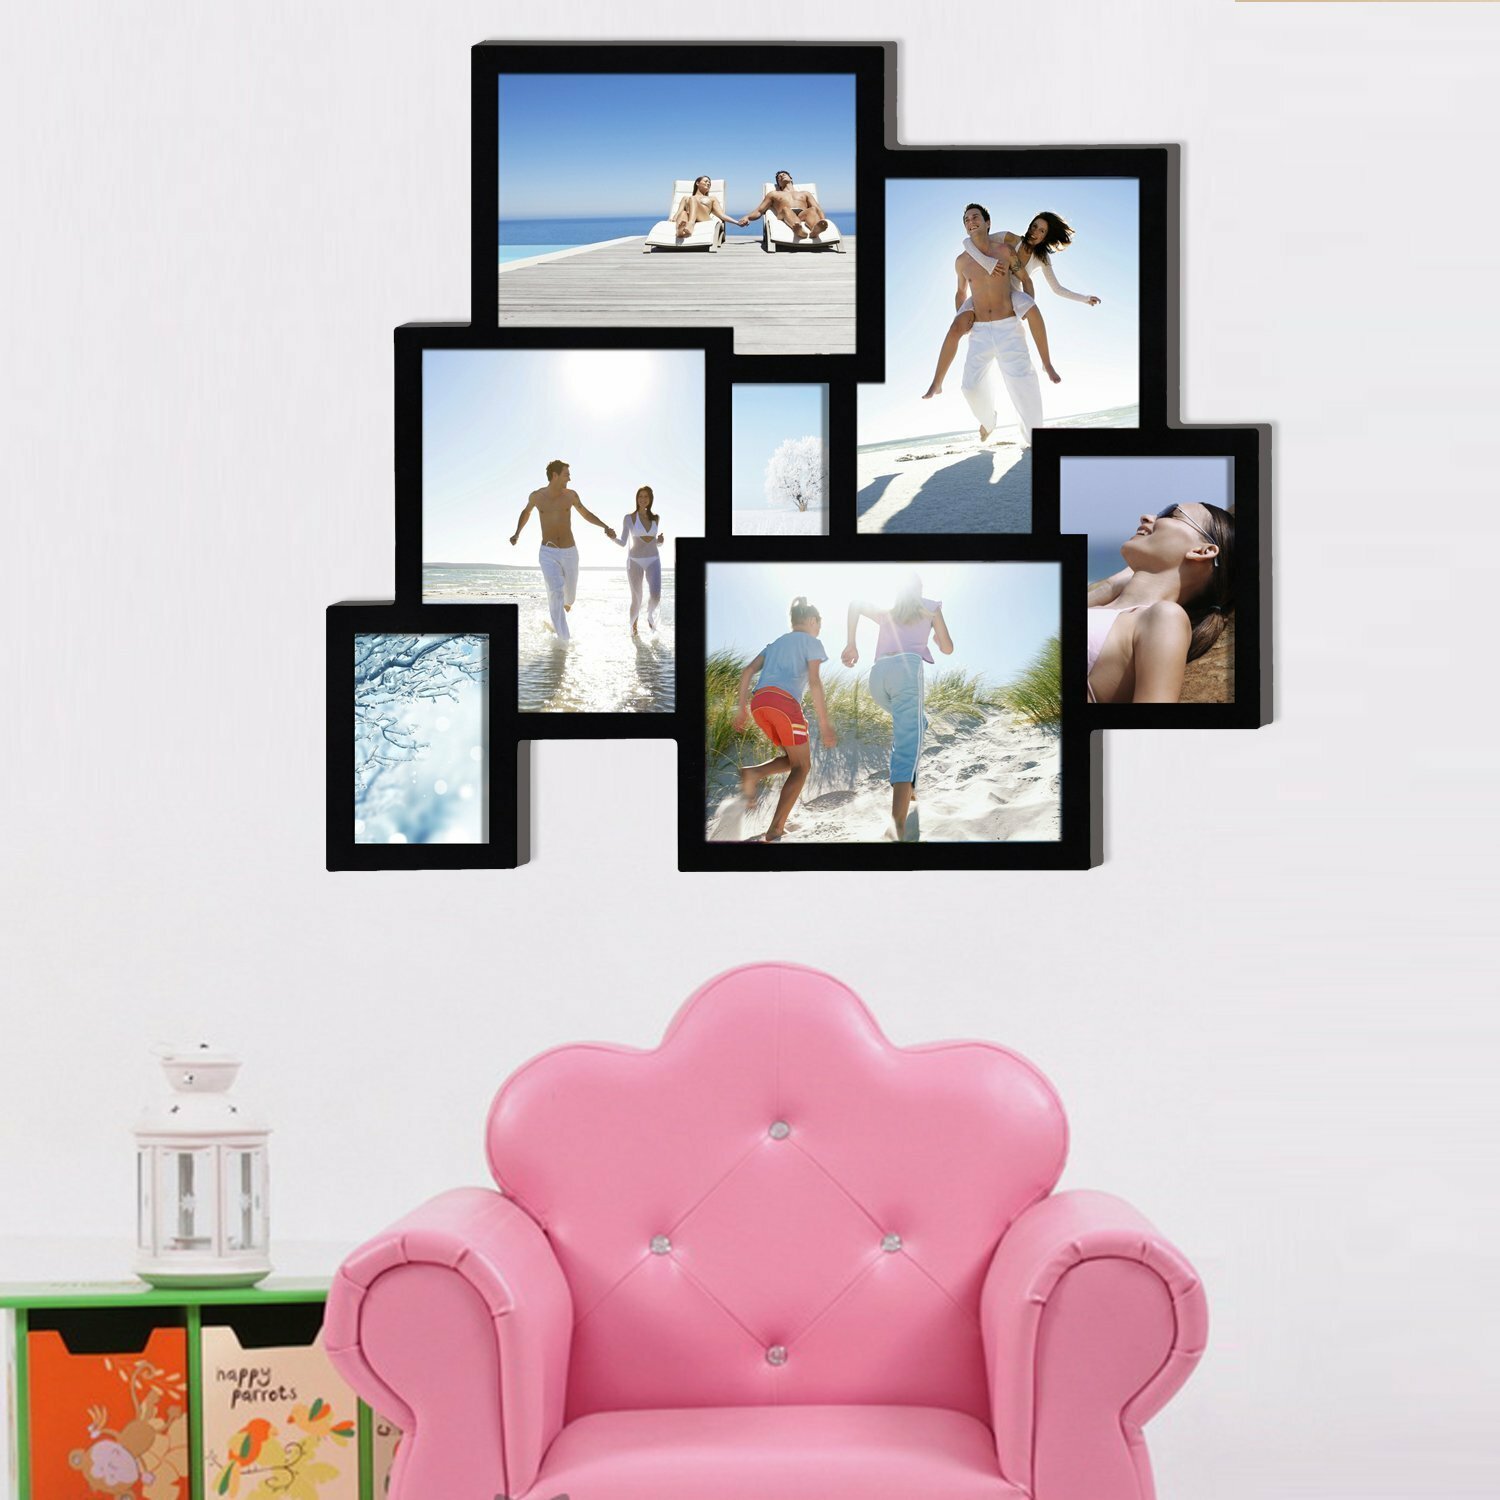 Adecotrading 7 Opening Collage Picture Frame And Reviews Wayfair